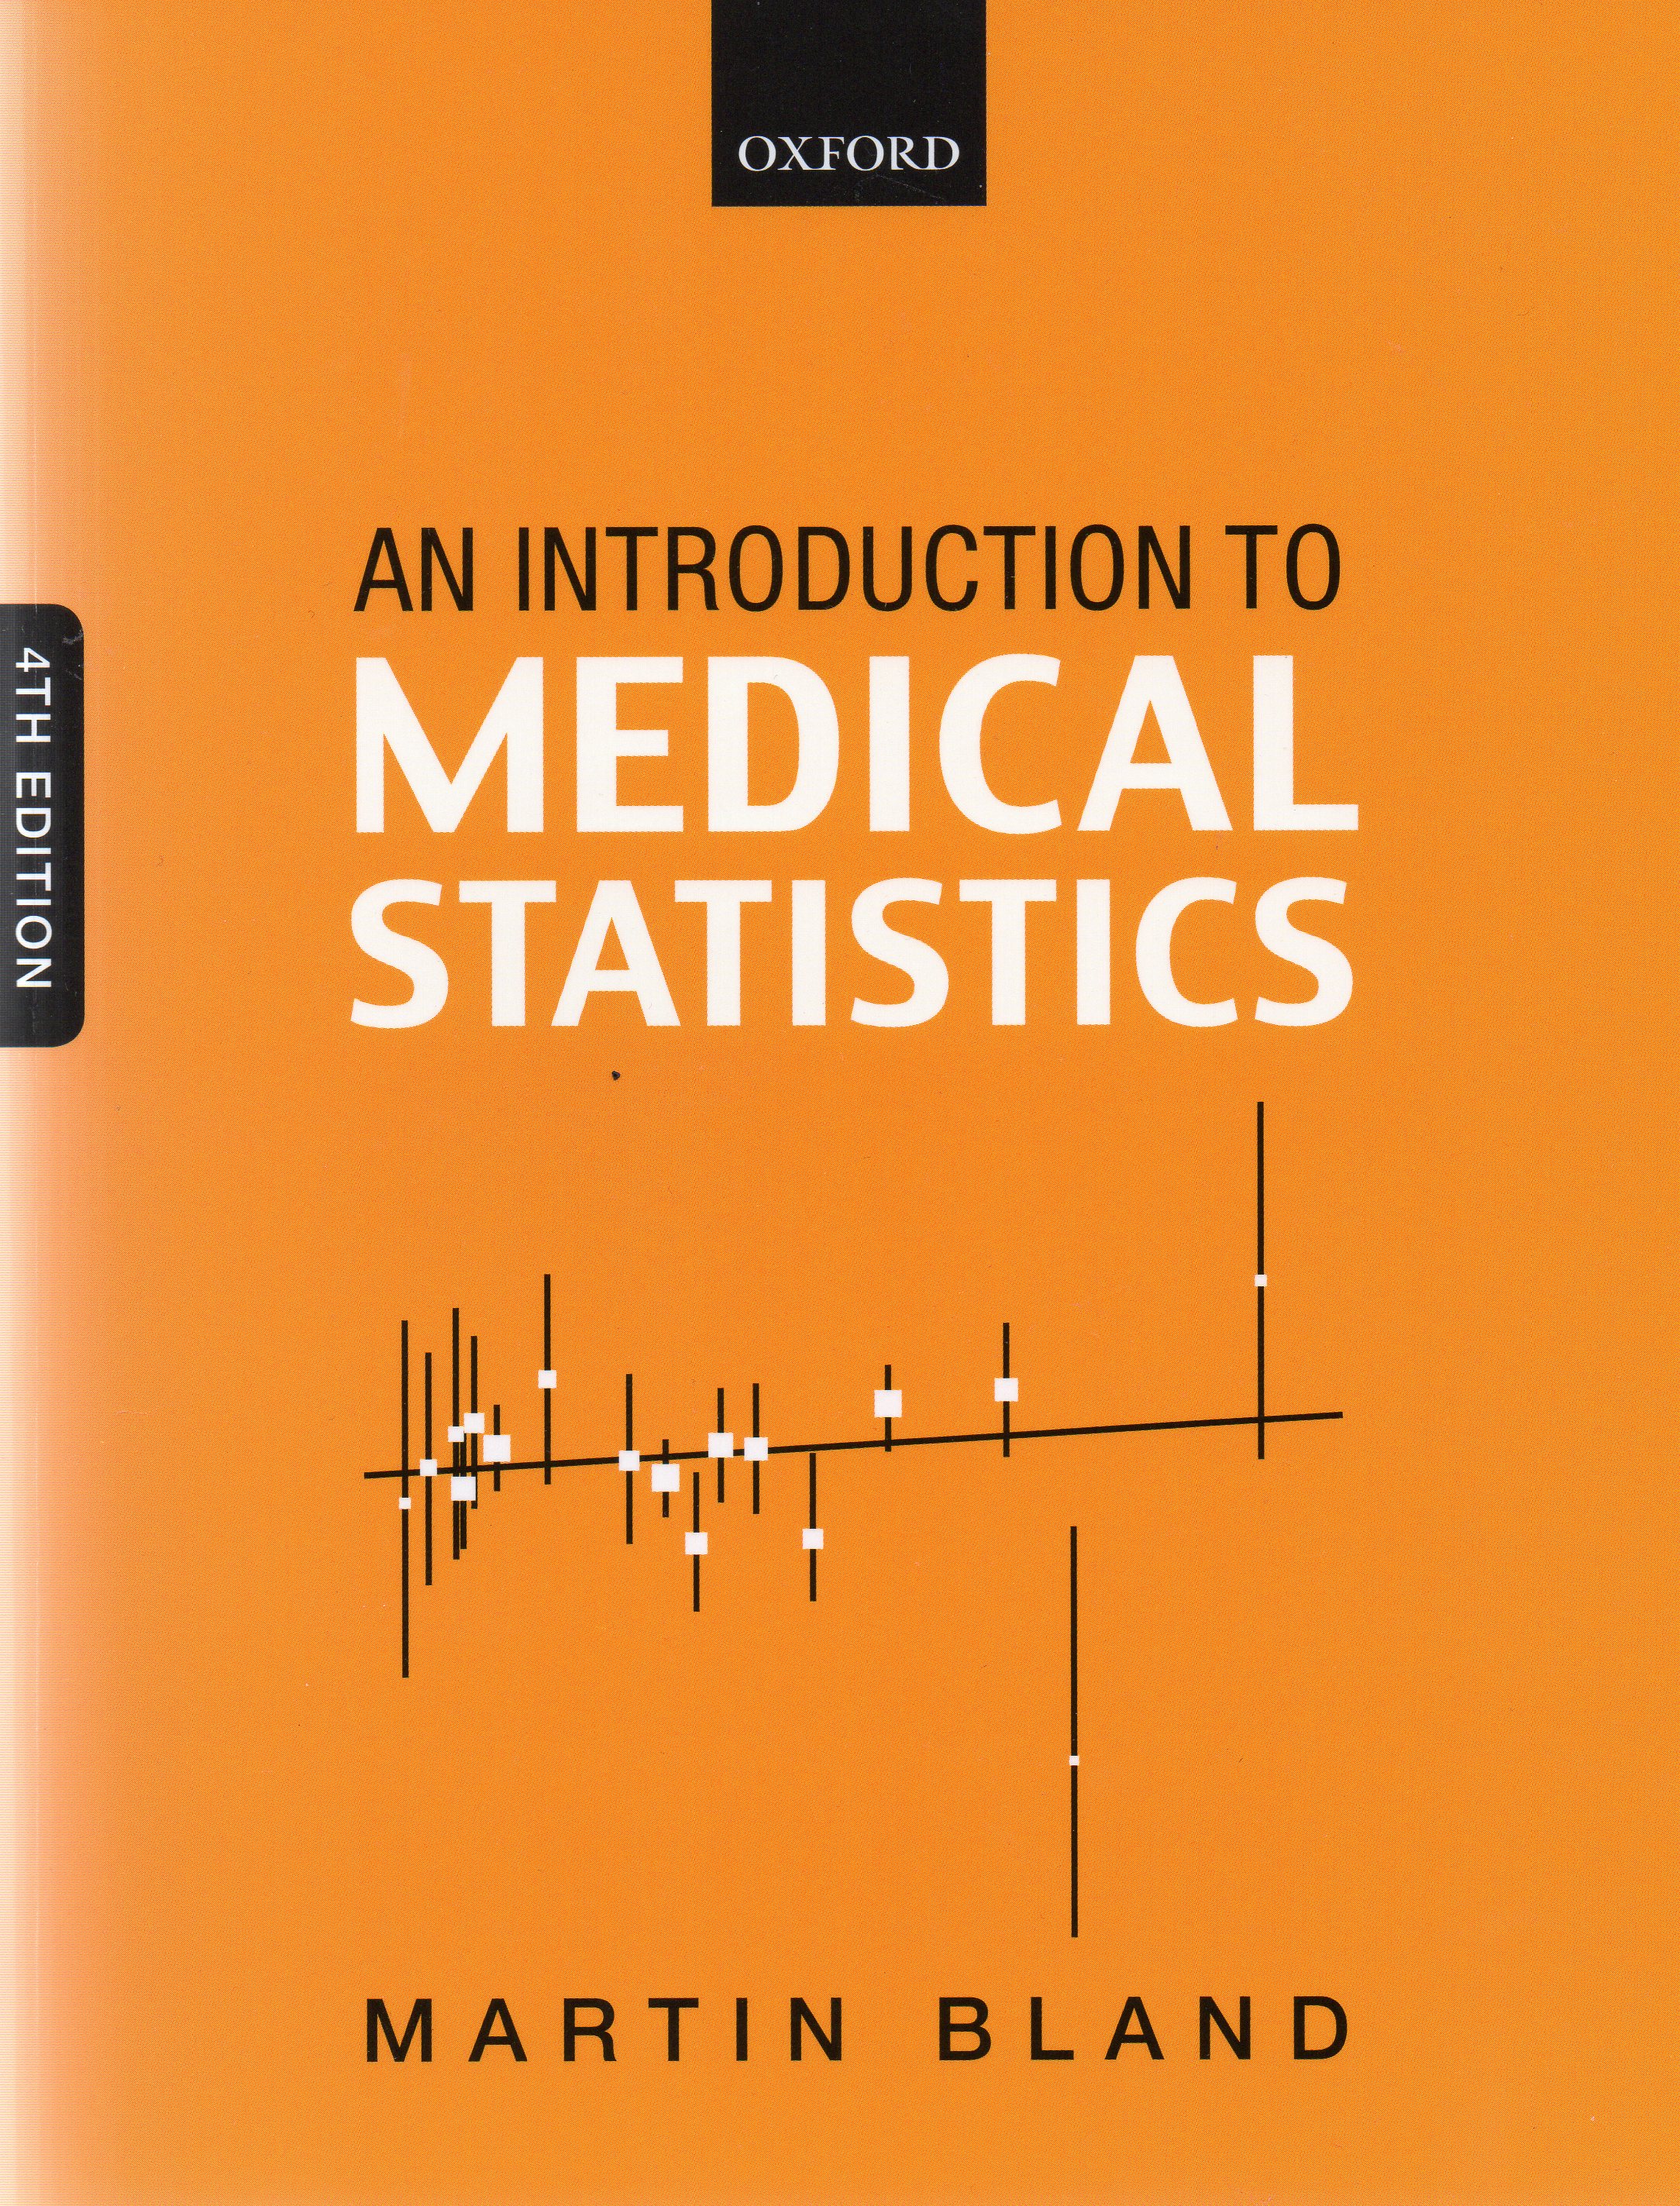 Cover of the fourth edition of An Introduction to Medical Statistics